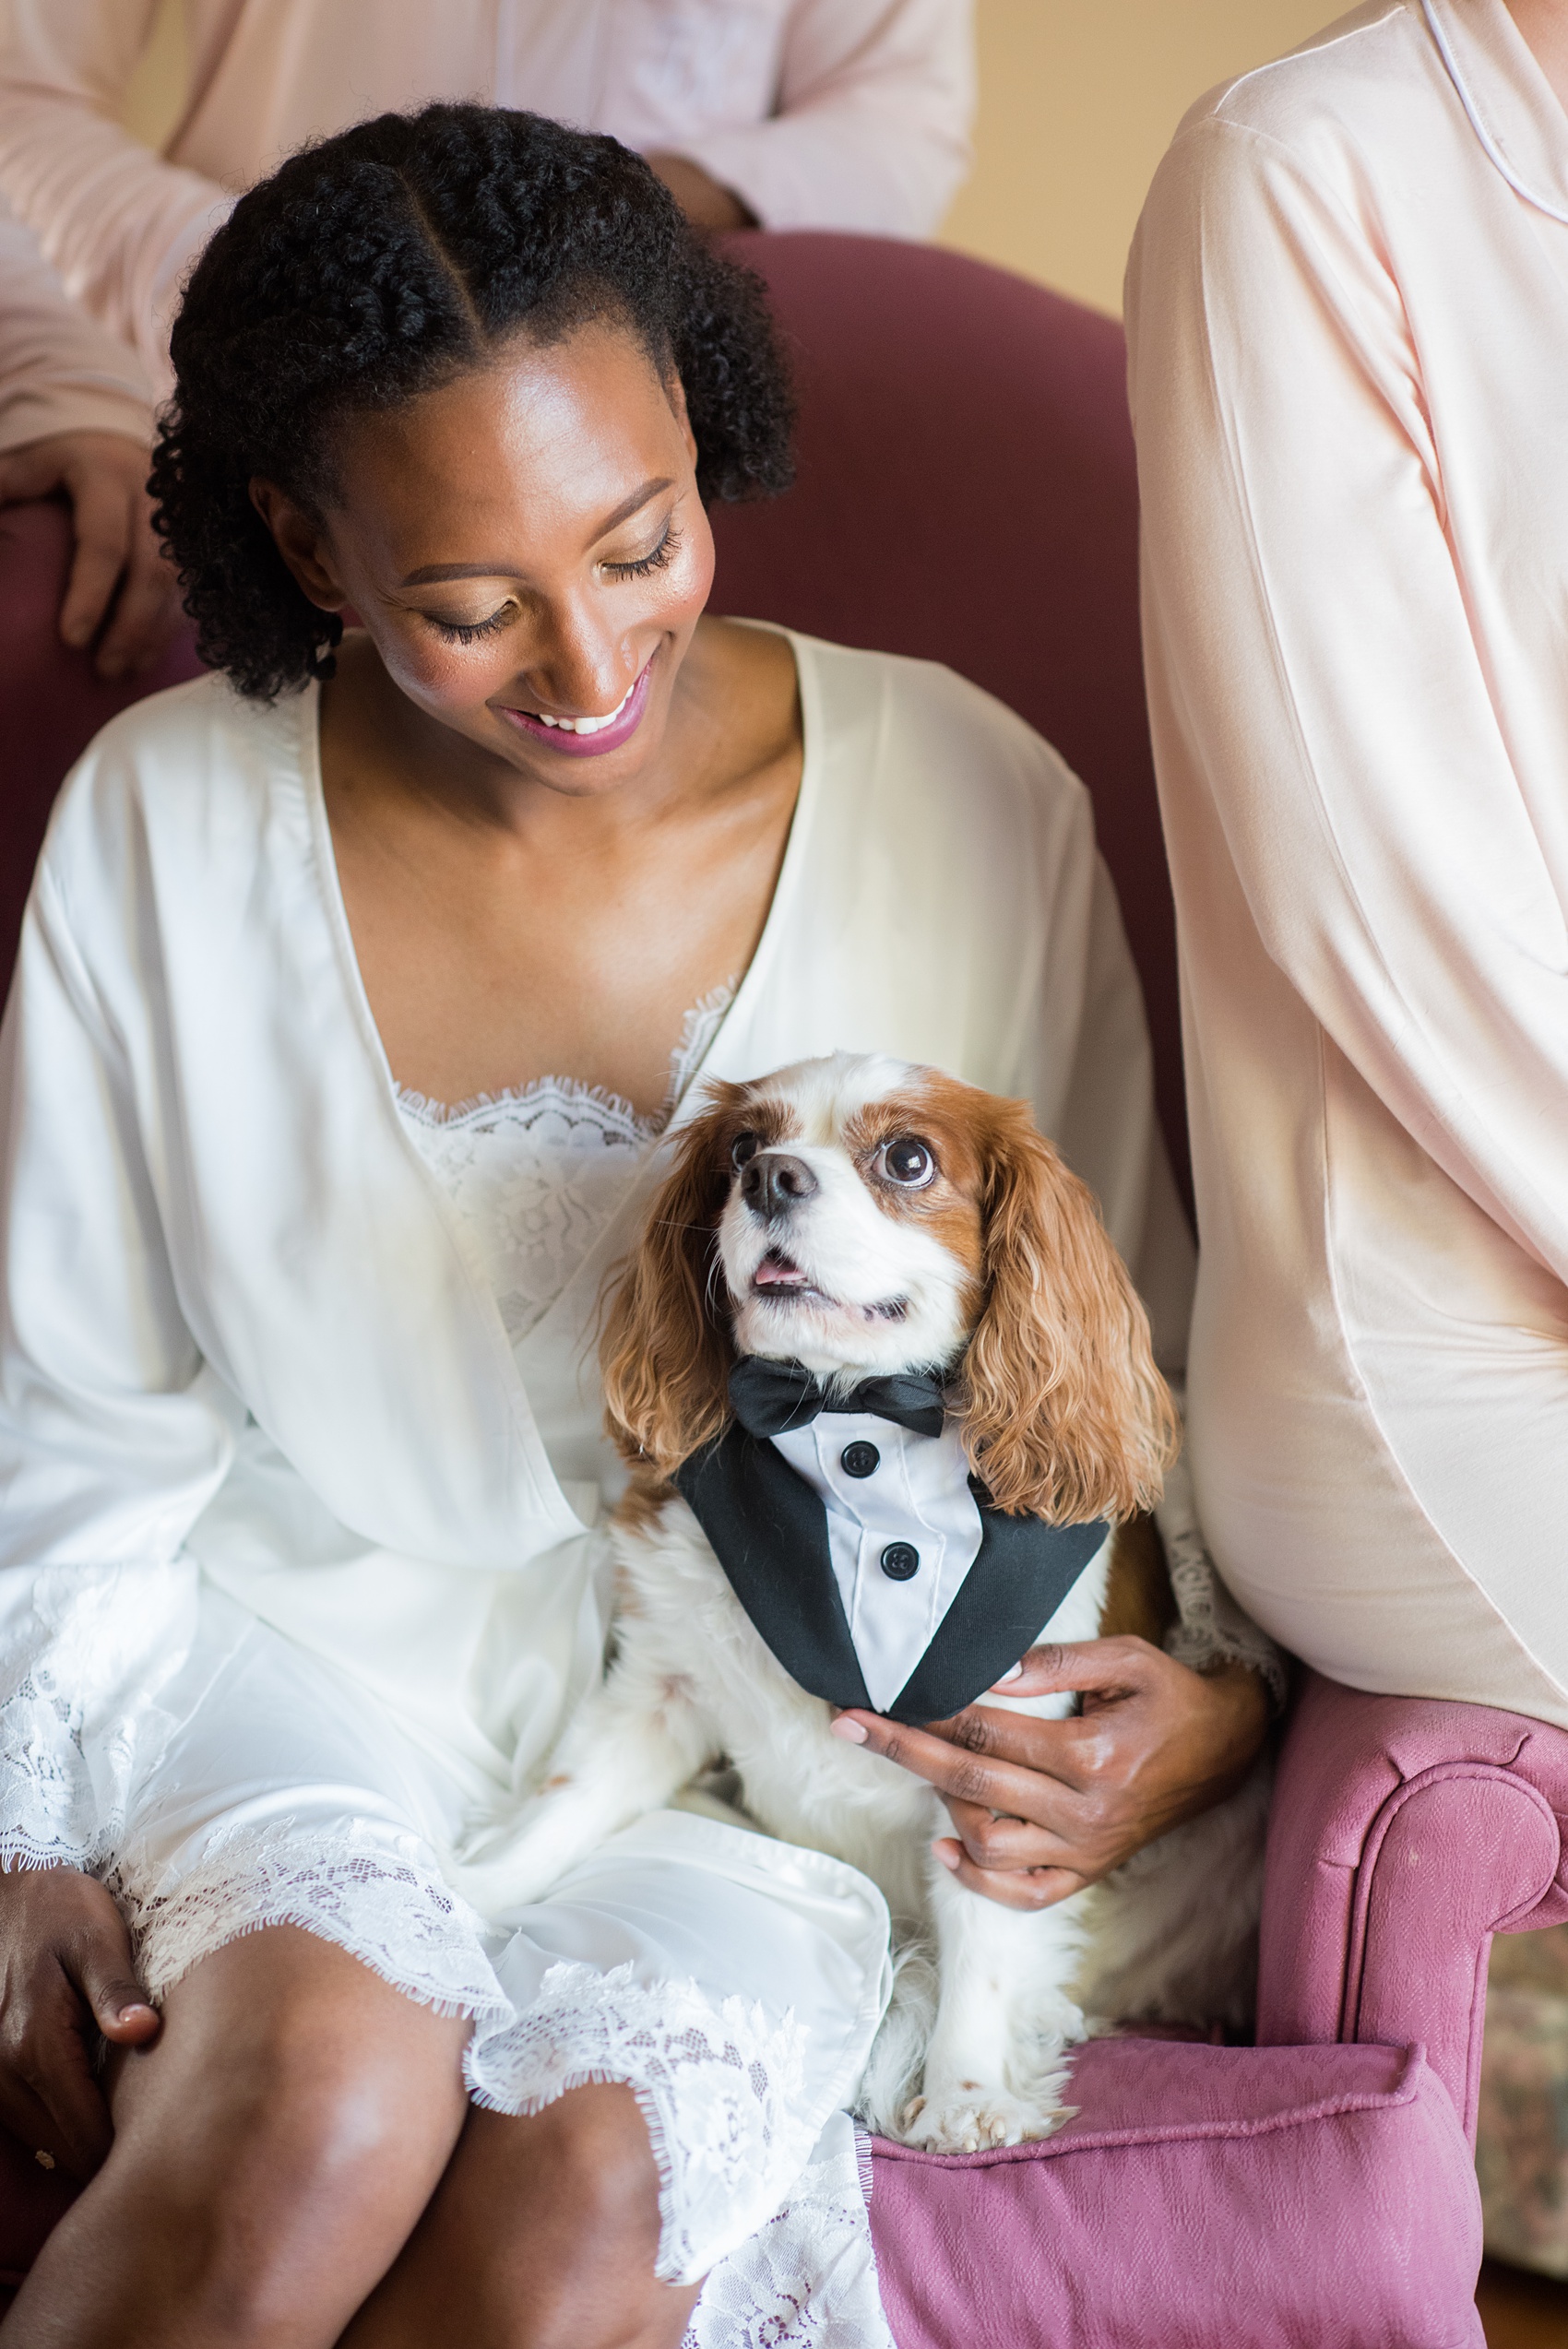 A fall wedding with burgundy, dusty rose and grey details. The bride got ready at her childhood home near the venue with her bridesmaids in monogrammed pink pajamas, with her King Charles Spaniard dog. Mikkel Paige Photography, photographer in Greenville NC and Raleigh captured this wedding at Rock Springs Center, planned by @vivalevent. Click through for more details and cute pictures from their day! #mikkelpaige #northcarolinawedding #southernwedding #gettingready #burgundywedding